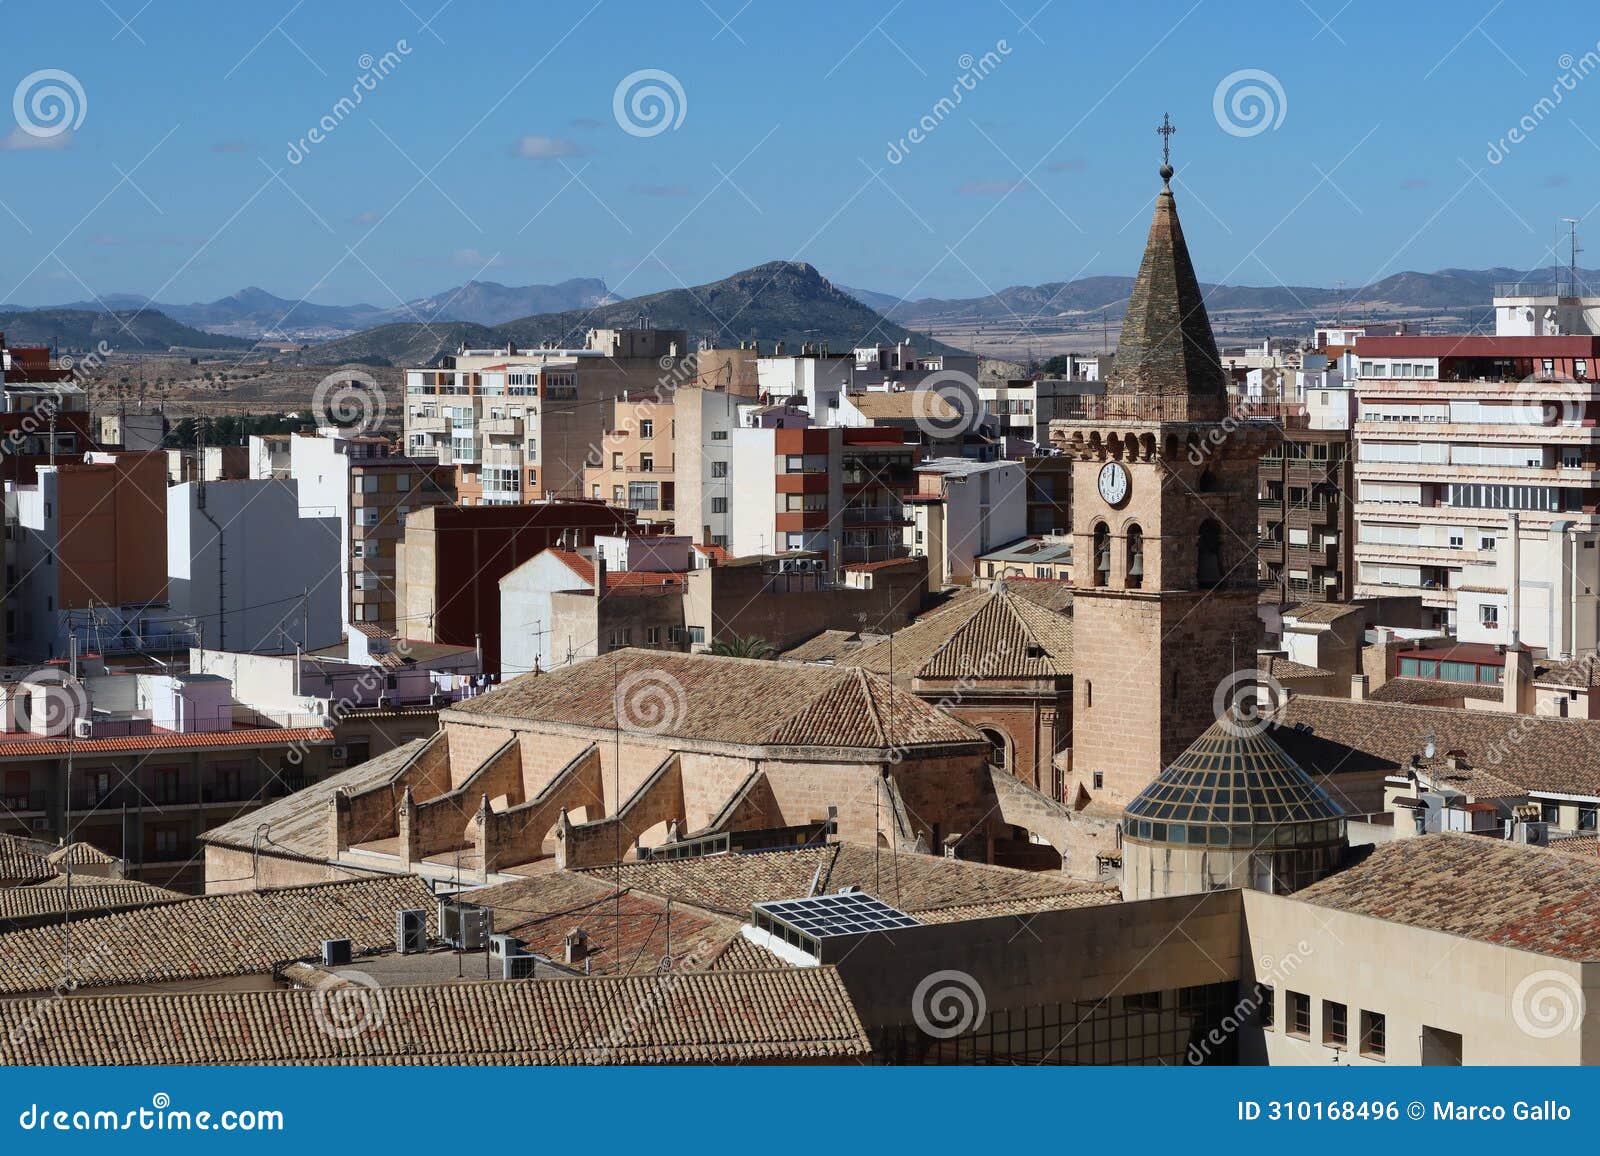 bell tower of the church of santiago apostol with mountains in the background. villena, alicante, spain